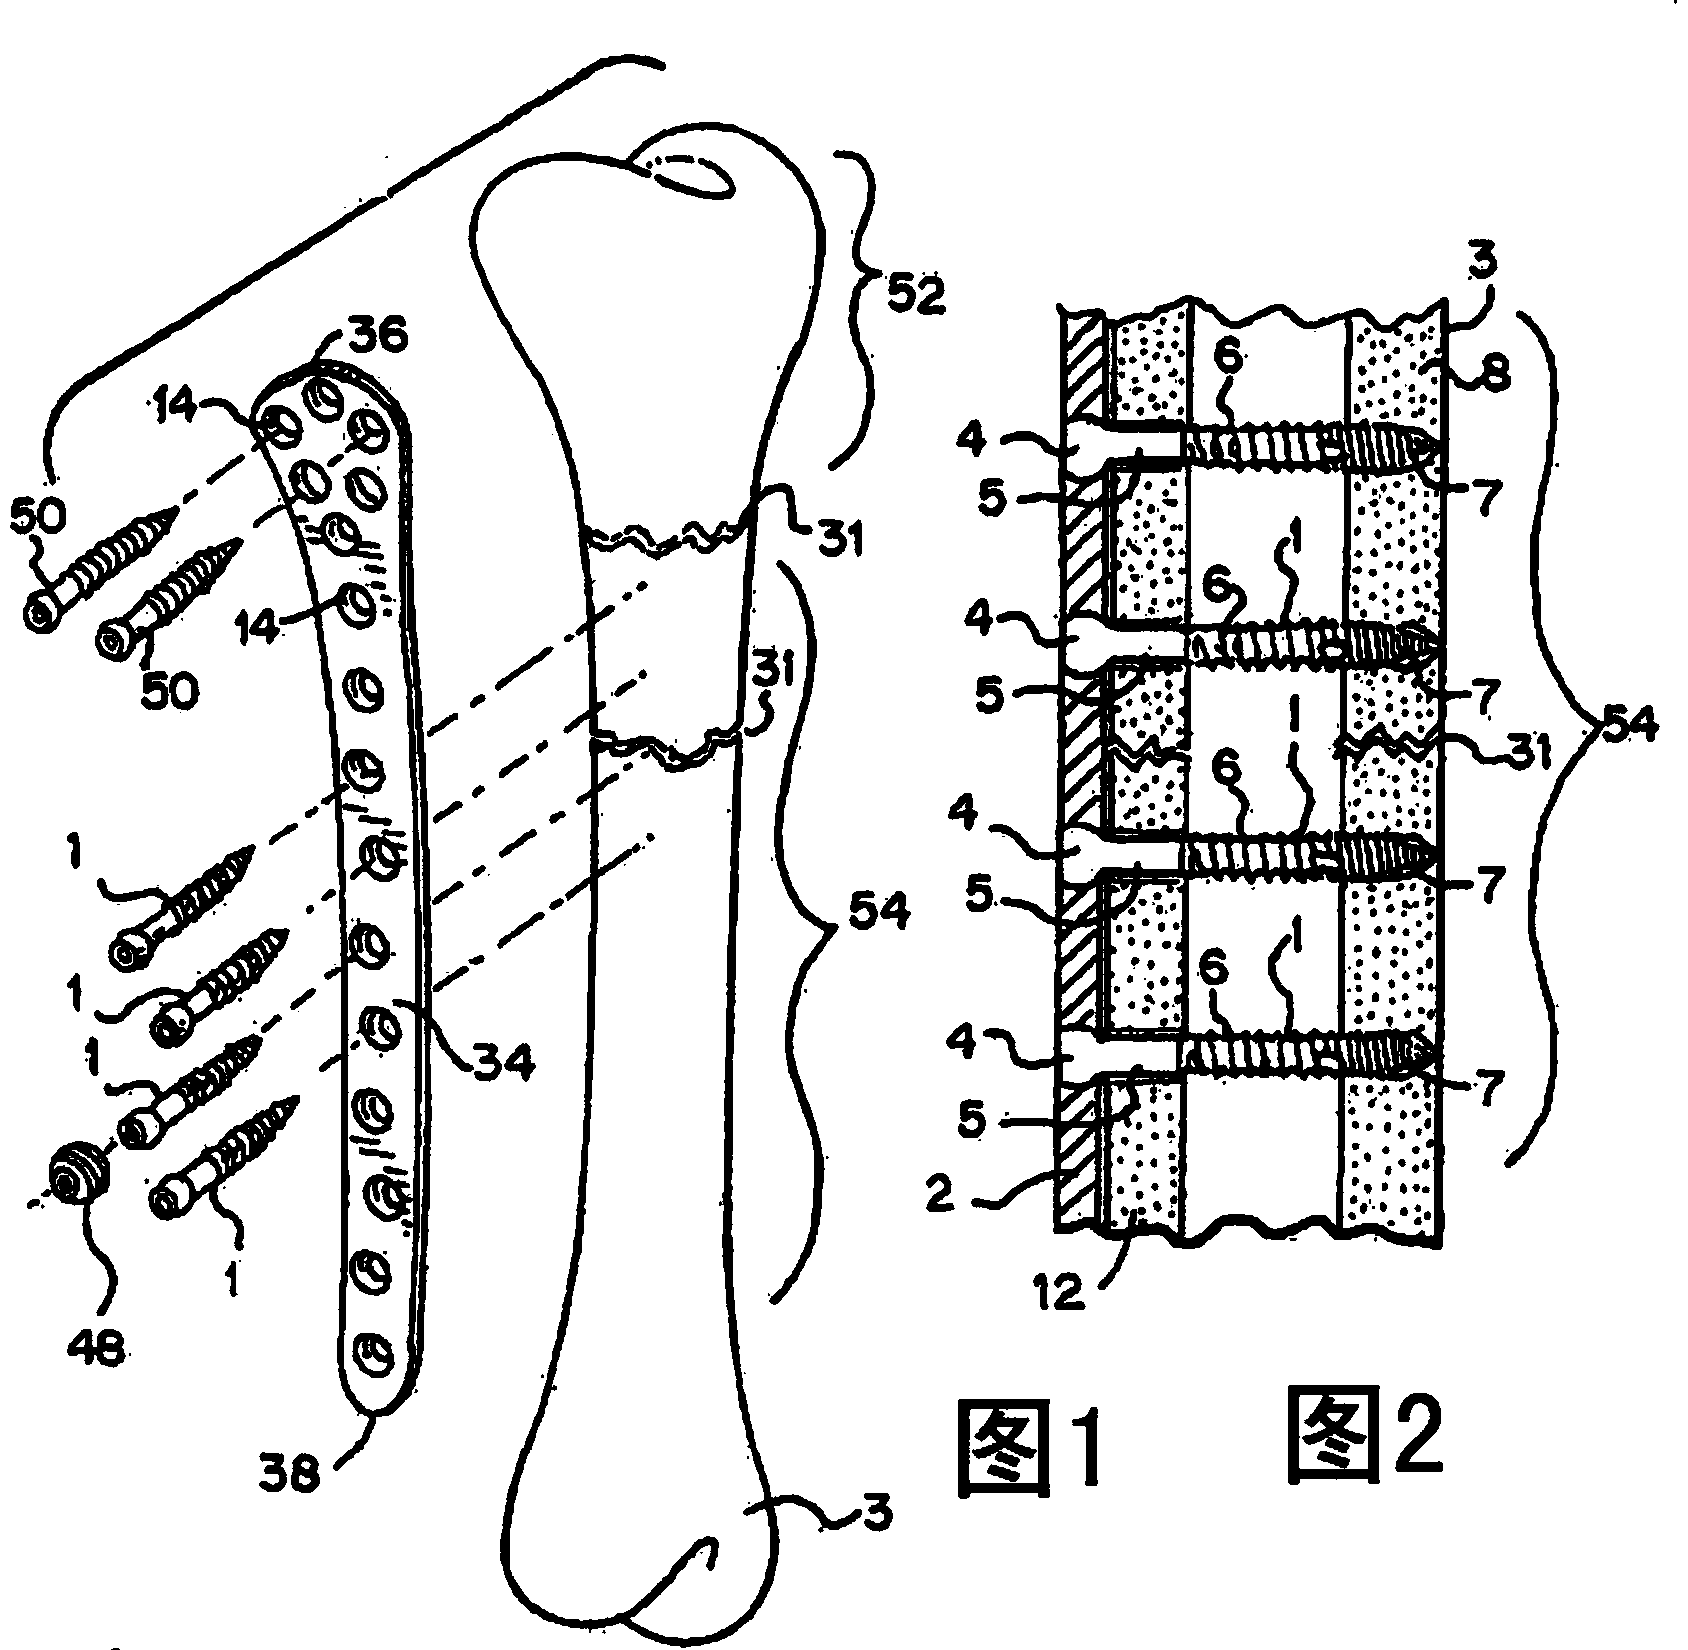 Bone screw with multiple thread profiles for far cortical locking and flexible engagement to a bone